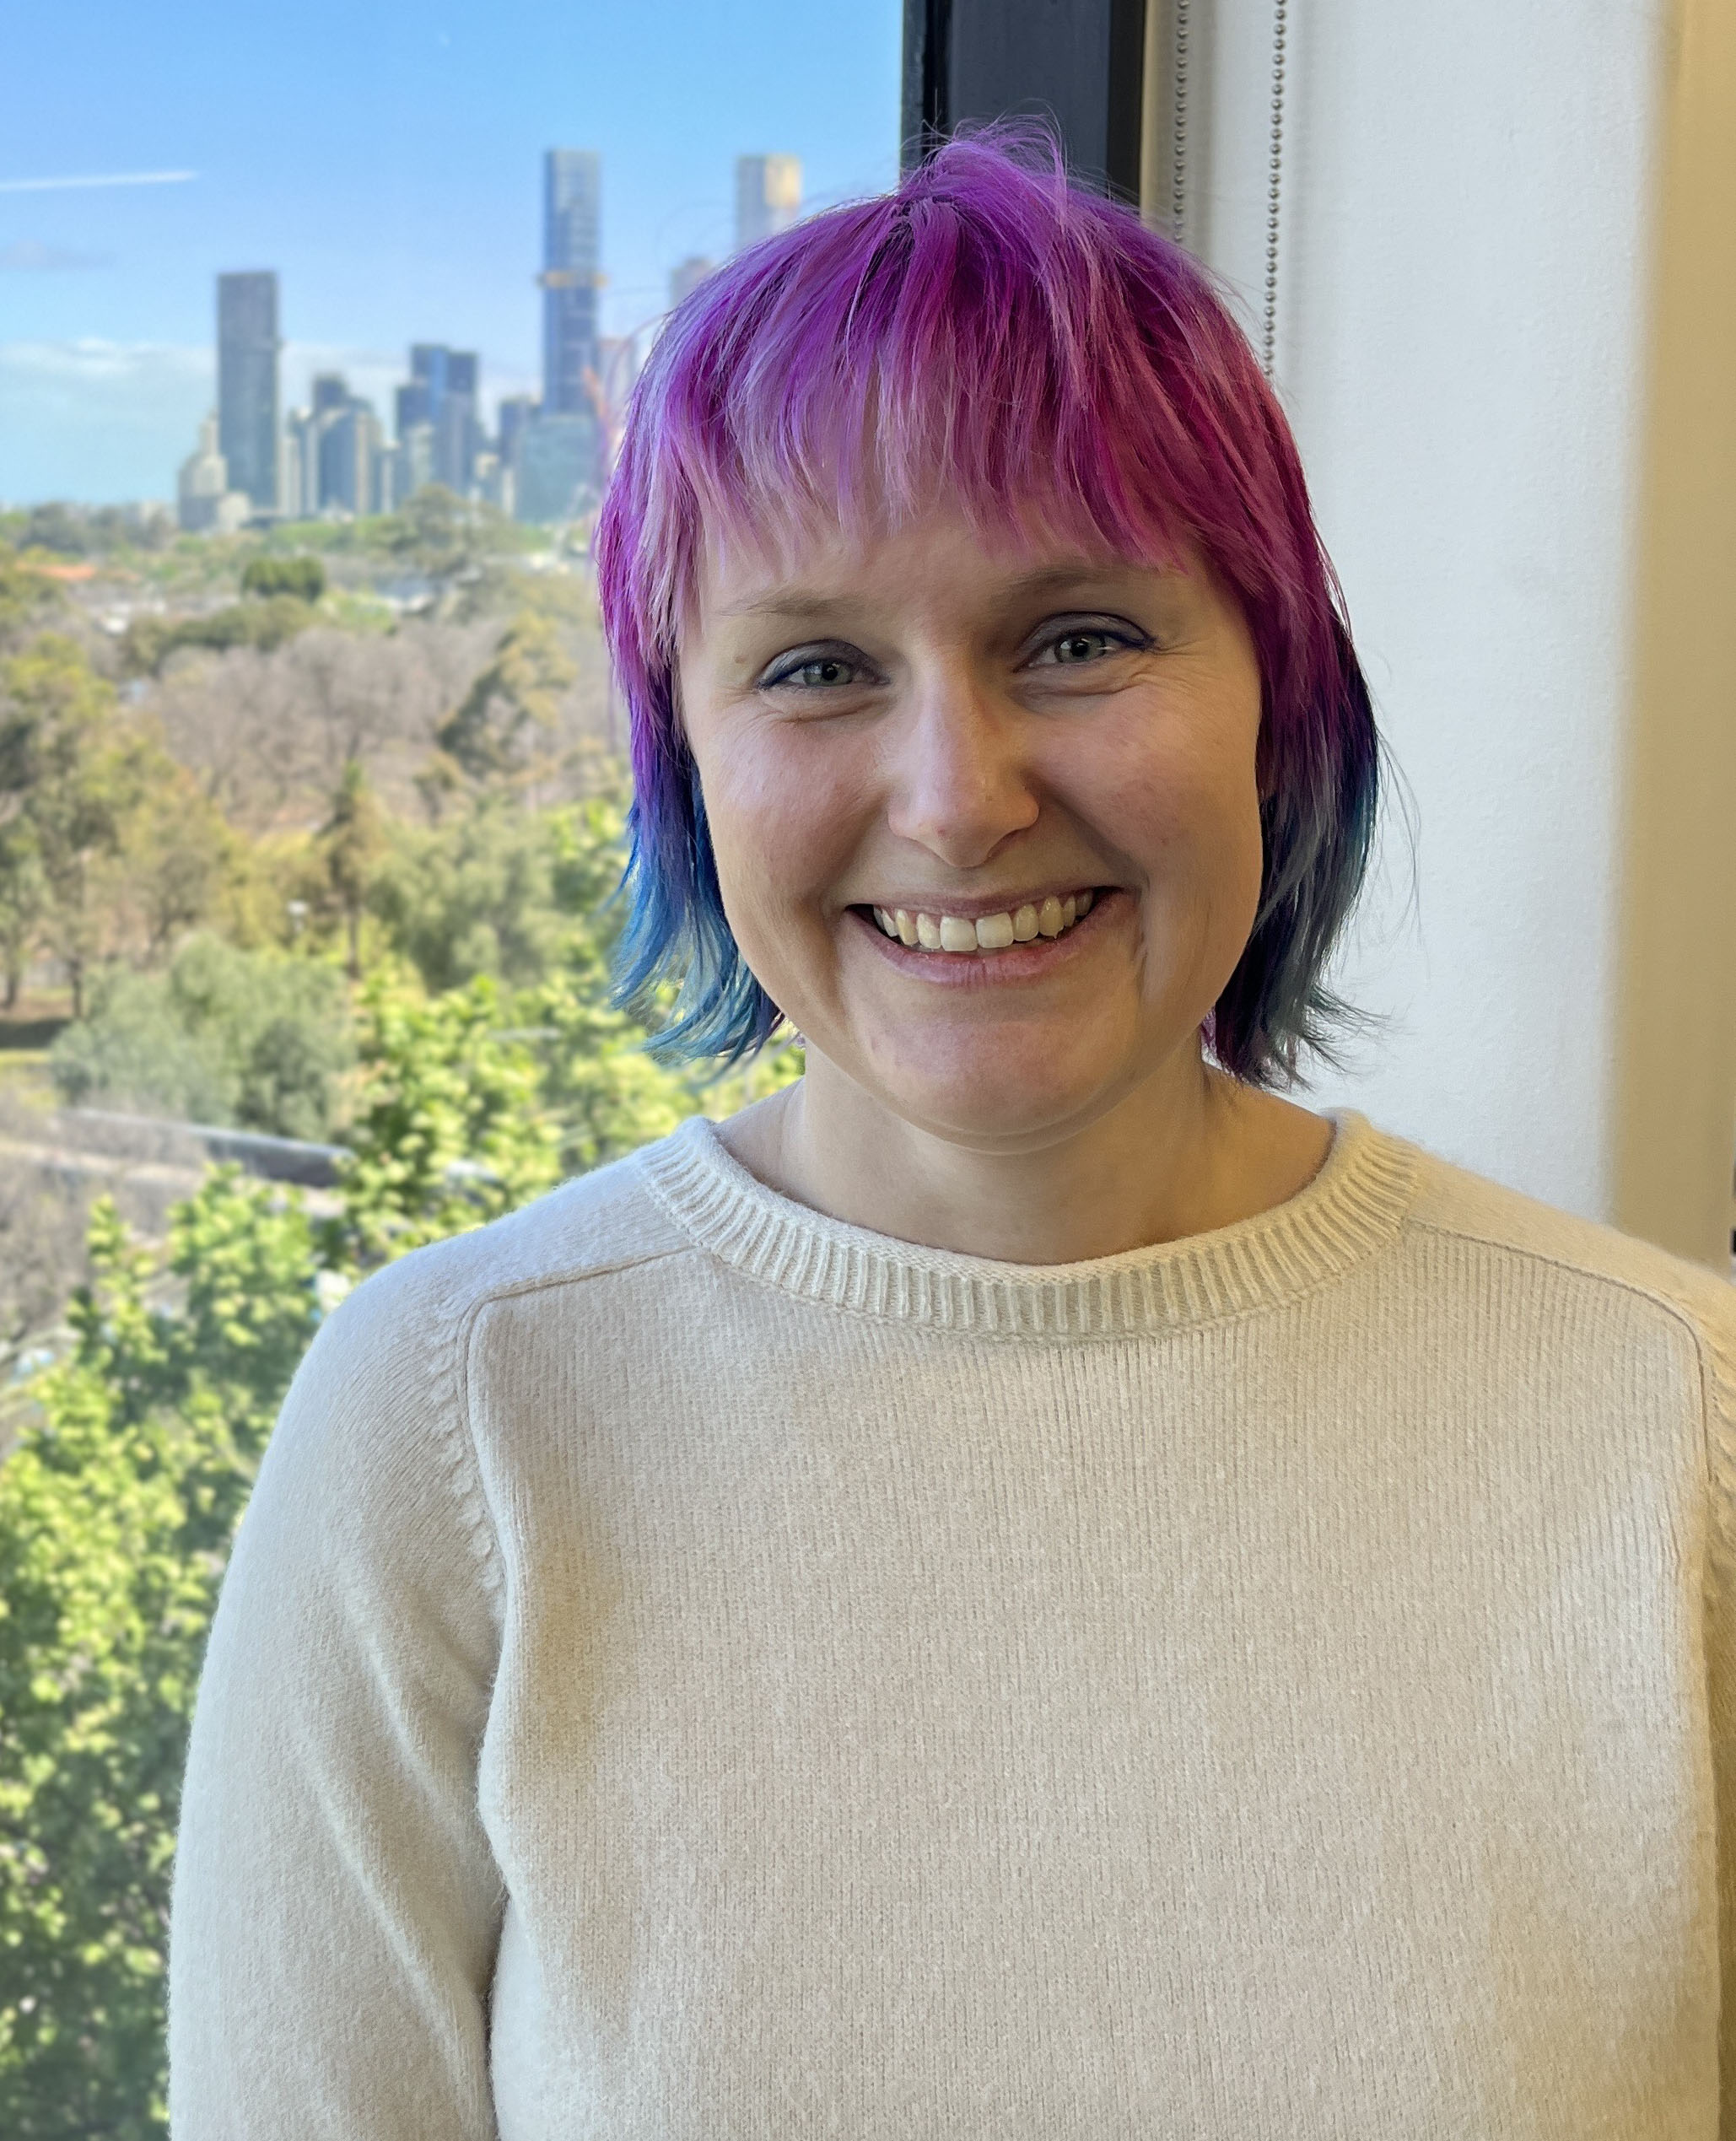 Danielle, a young white woman with rainbow hair, smiles for the camera. Her hair is pink on top and blue lower down and sits above her shoulders. She is wearing a white knit top and standing in front of window with a cityscape and garden behind her.